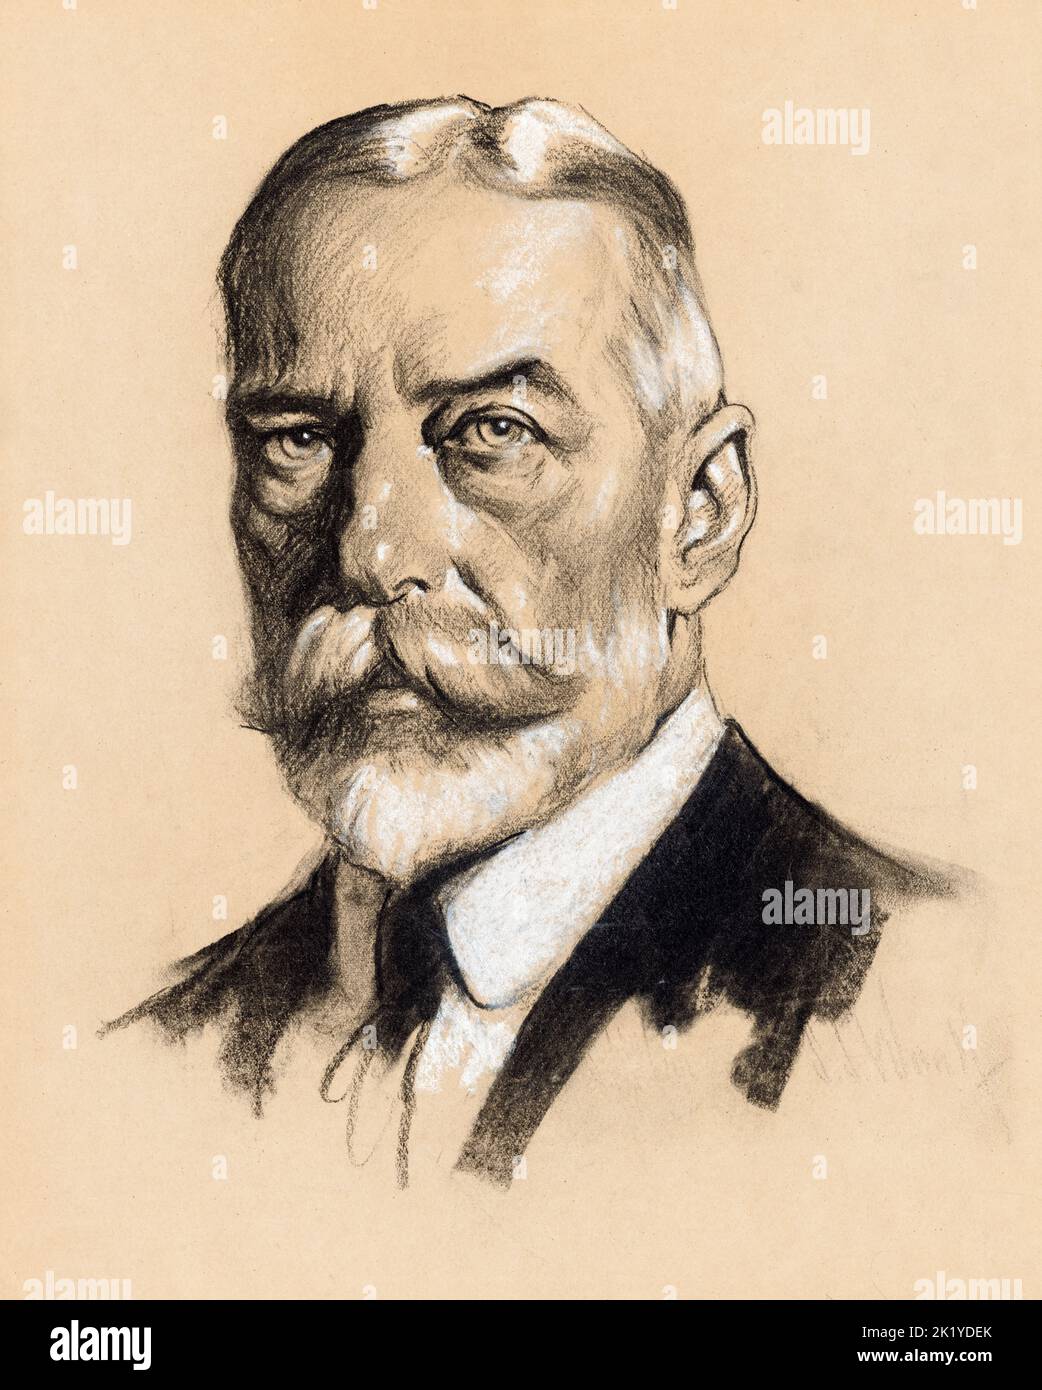 George V, (1865-1936), King of the United Kingdom, portrait drawing in charcoal, chalk by Samuel Johnson Woolf, 1932 Stock Photo